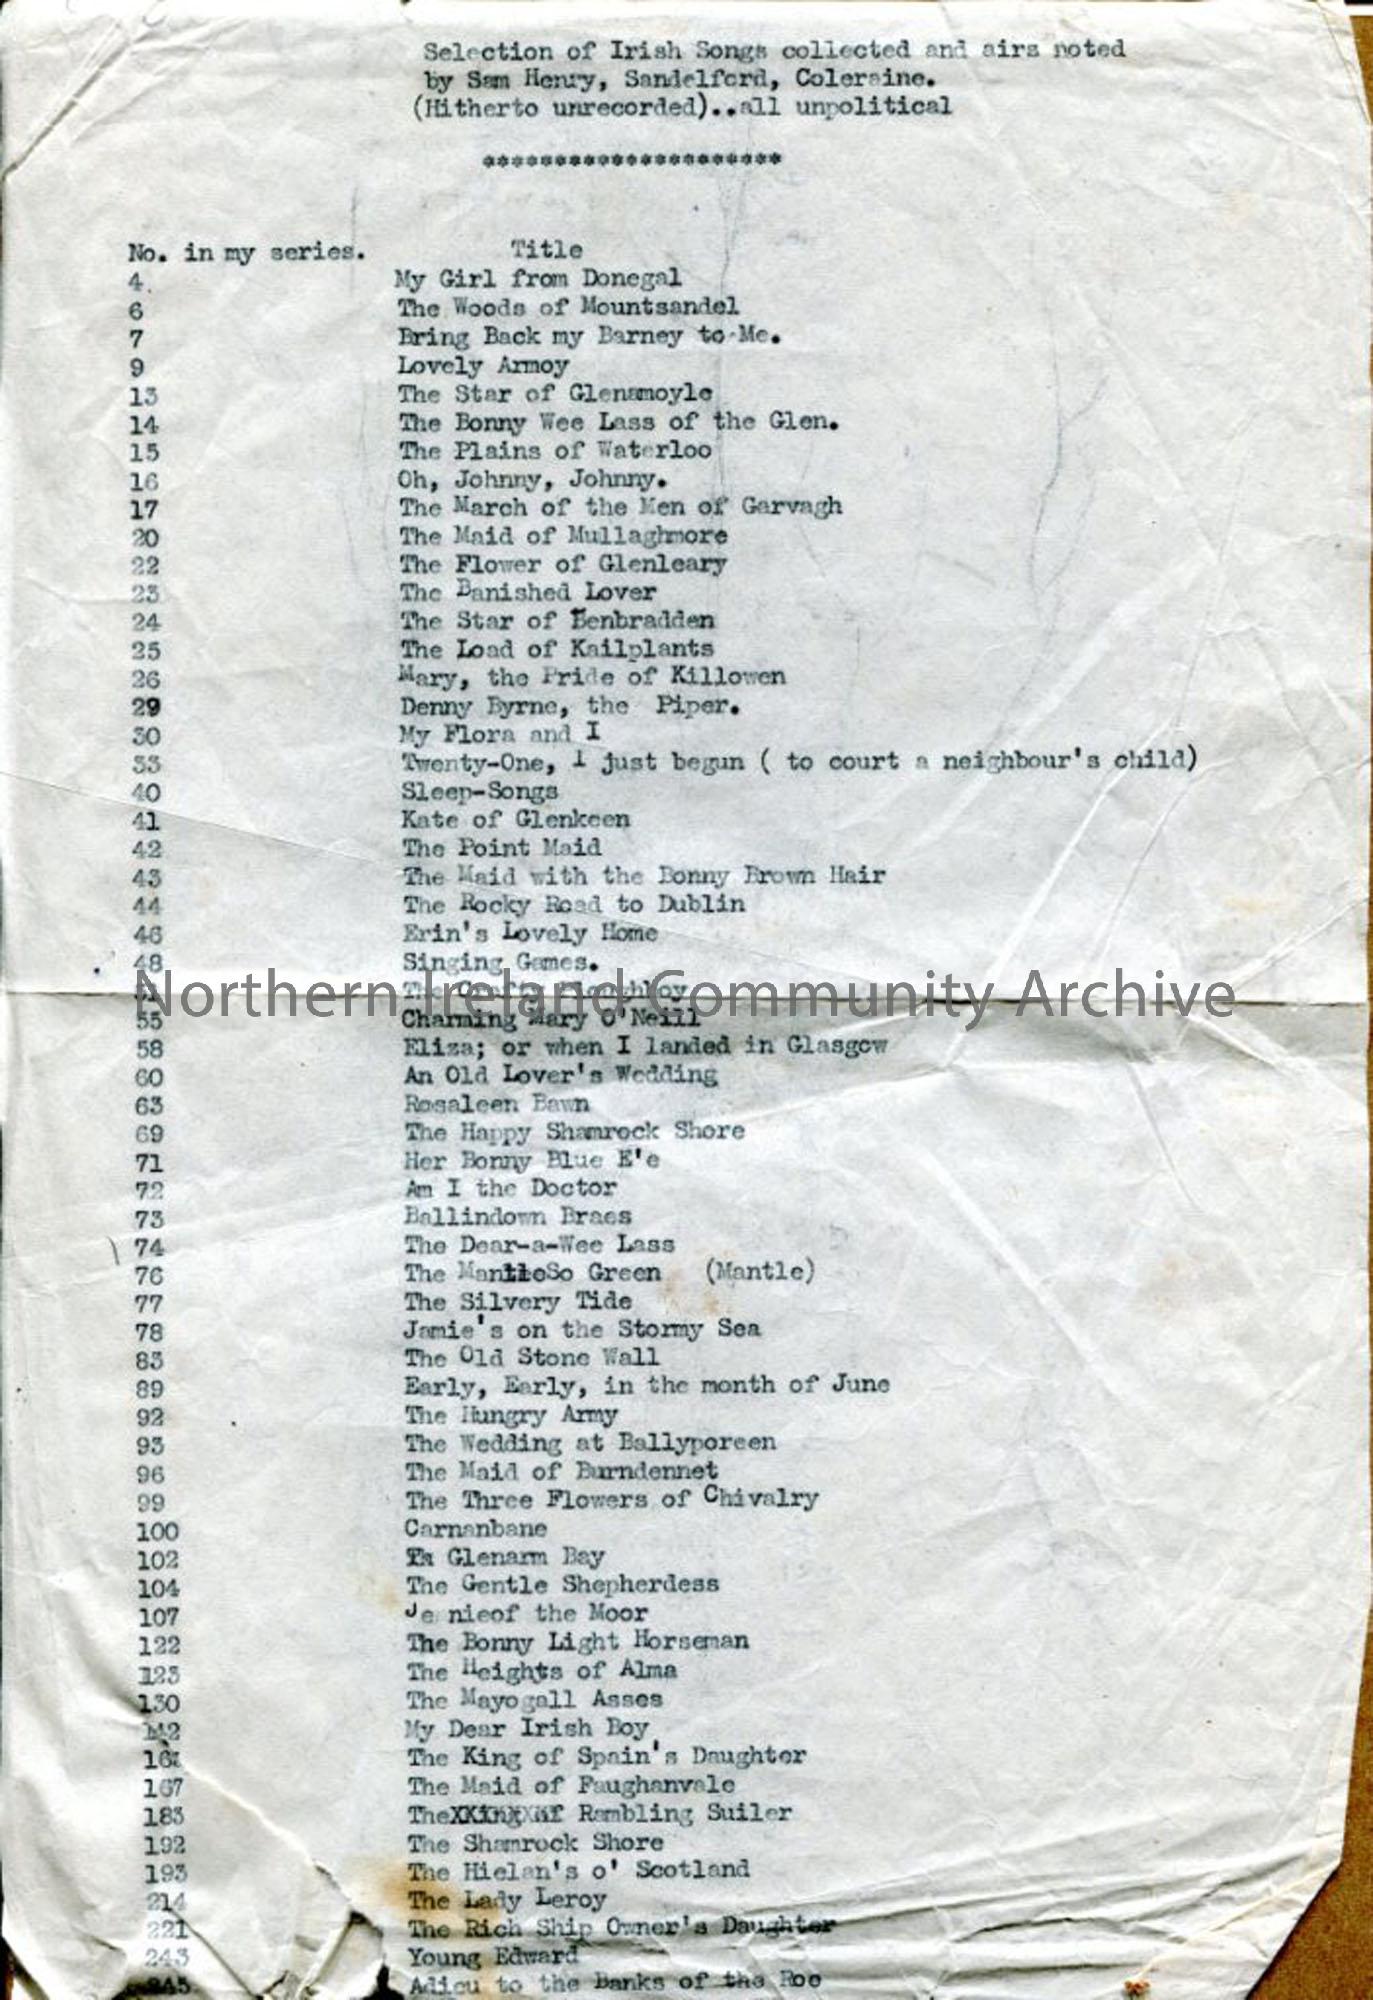 List of songs entitled ‘(hitherto unrecorded…all unpolitical’